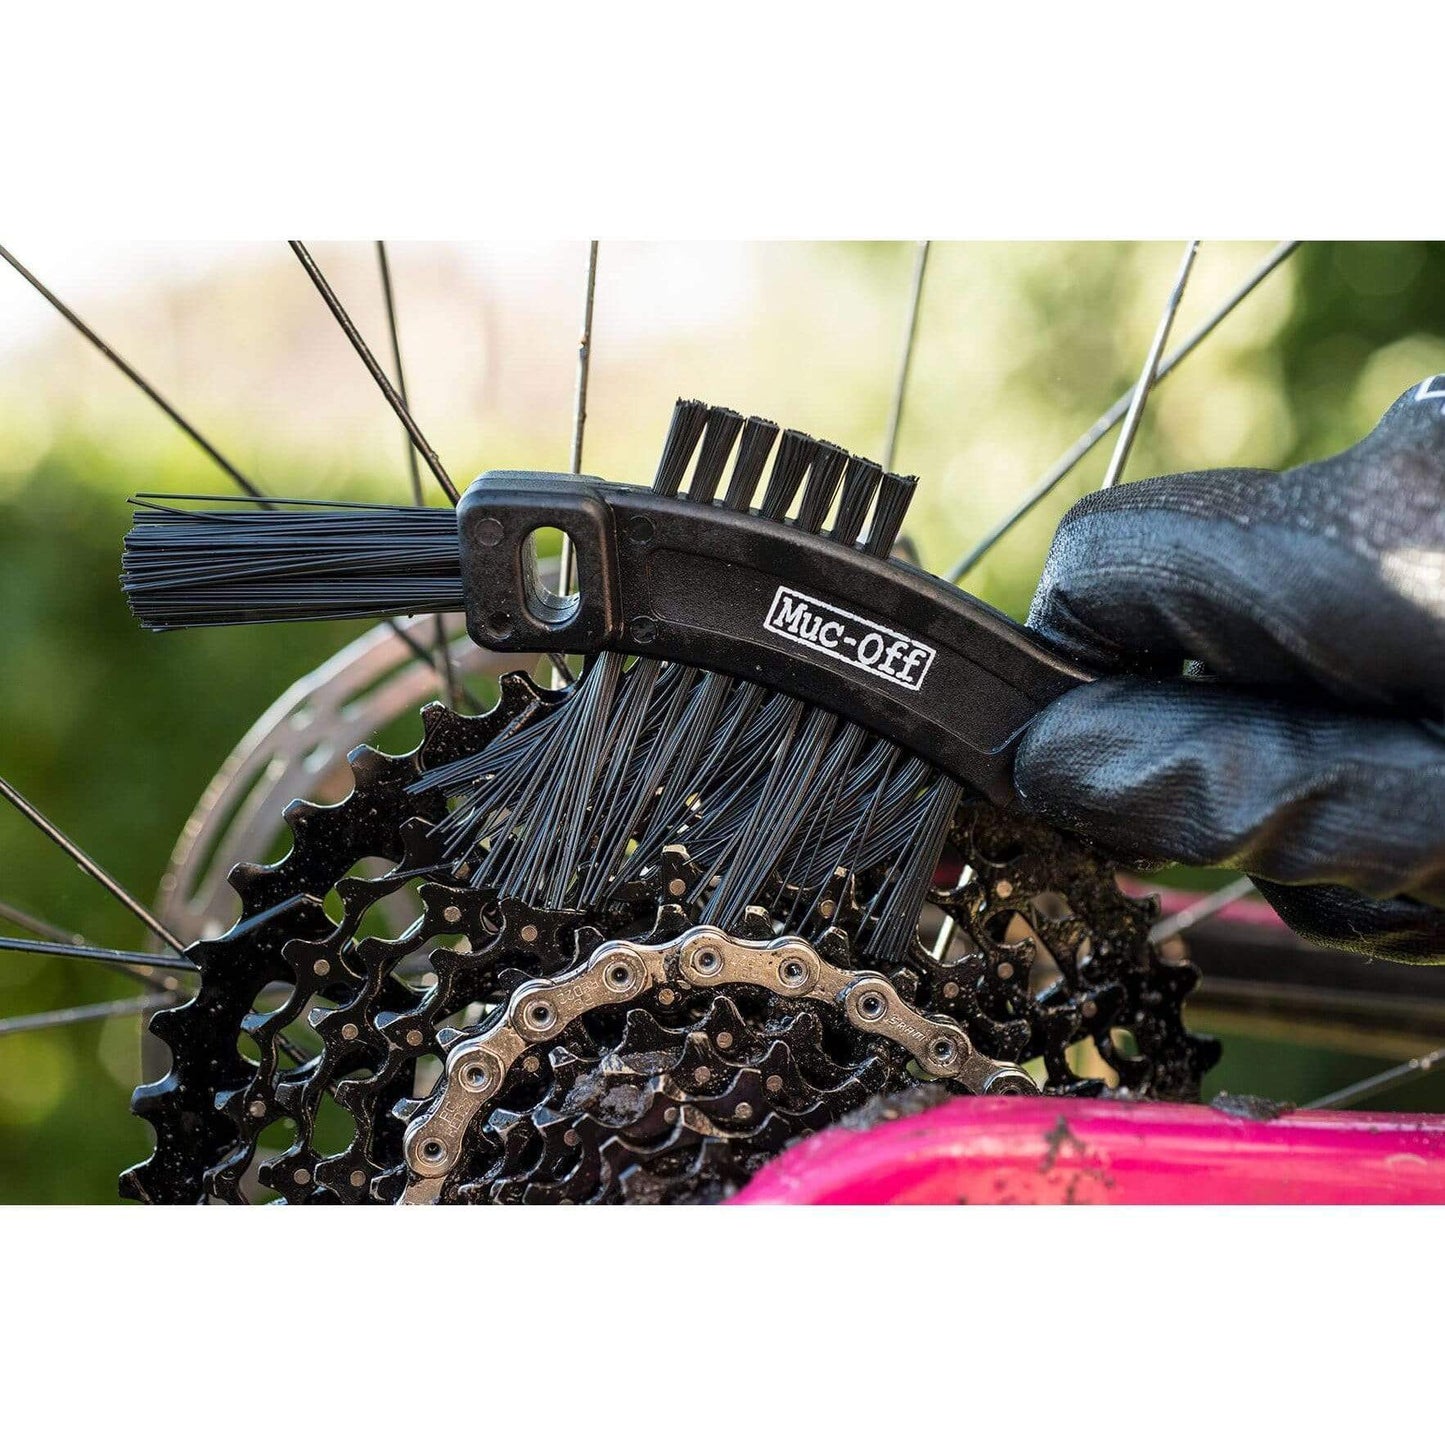 Muc-Off Claw Brush Combination - 3 Heads and Cassette Scraper Bike Cleaning Tool